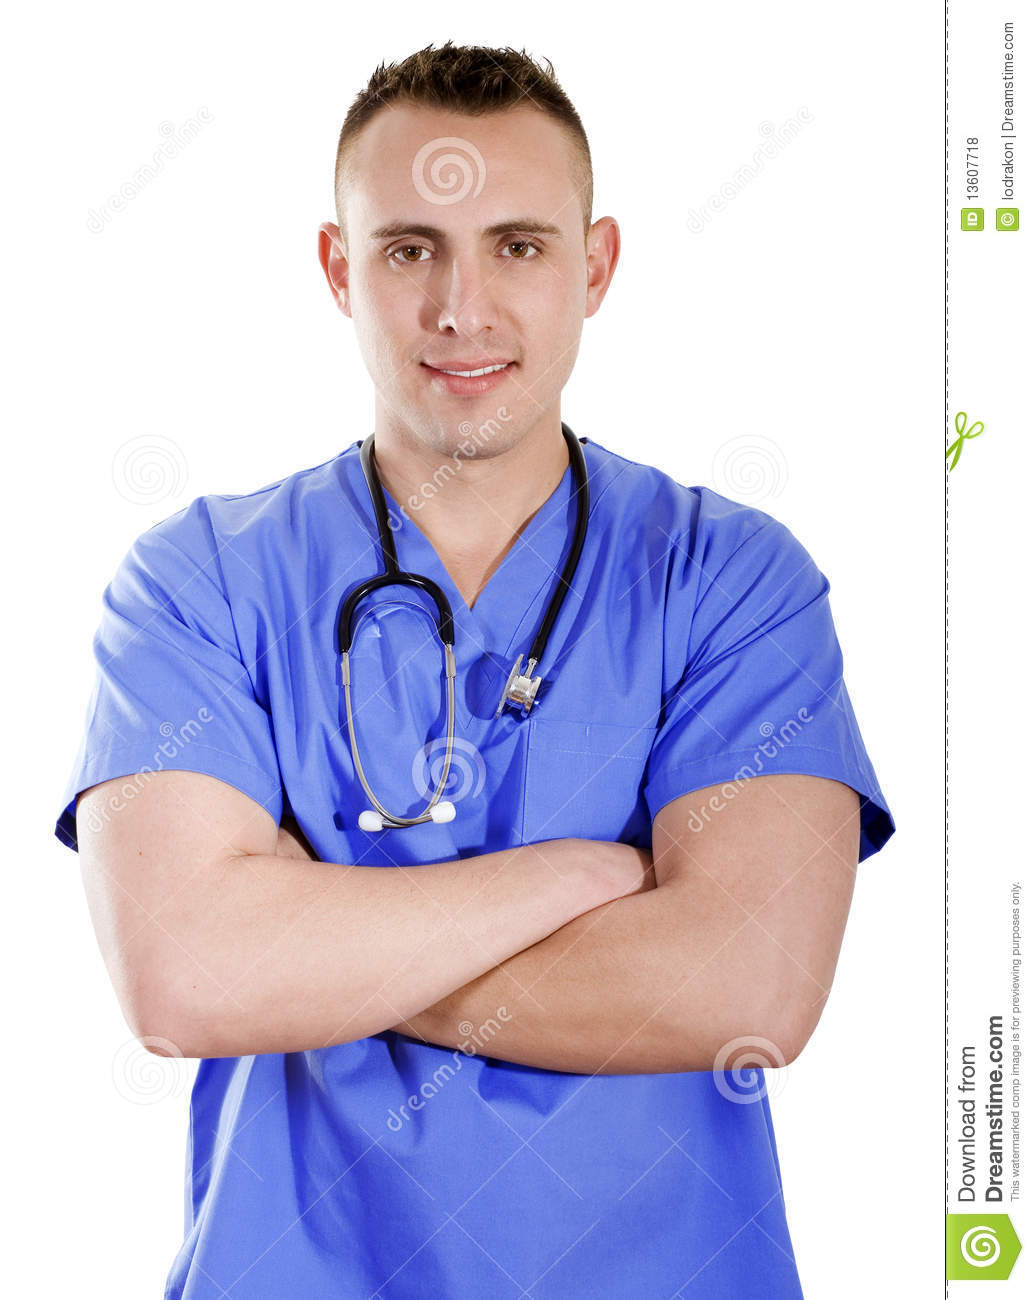 Stock Image Of Male Health Care Worker With Arms Crossed Over White